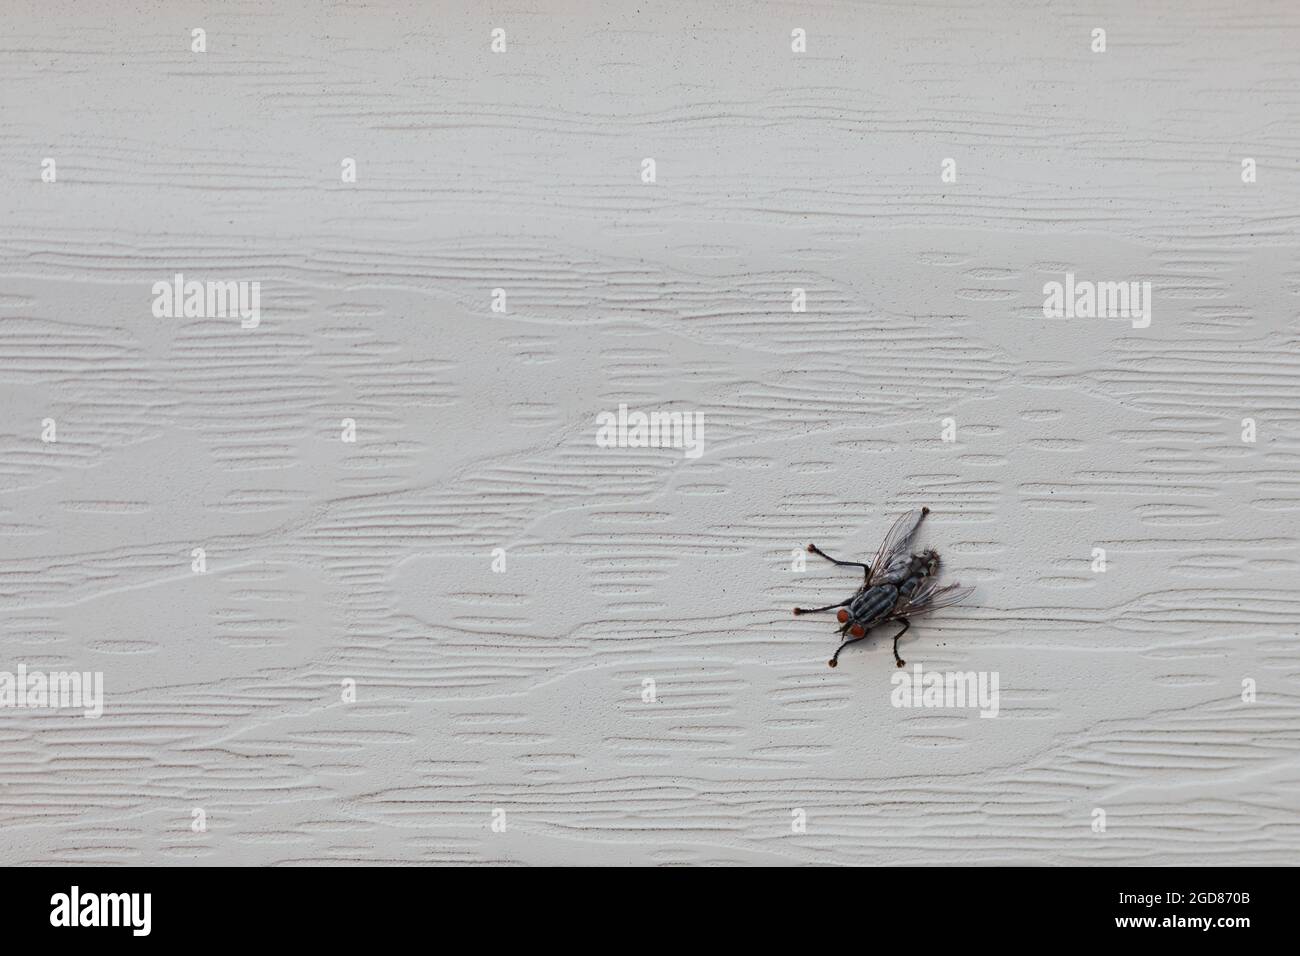 A flesh fly (of the family Sarcophagidae) clings to the cream vinyl siding on the wall of a house. Stock Photo